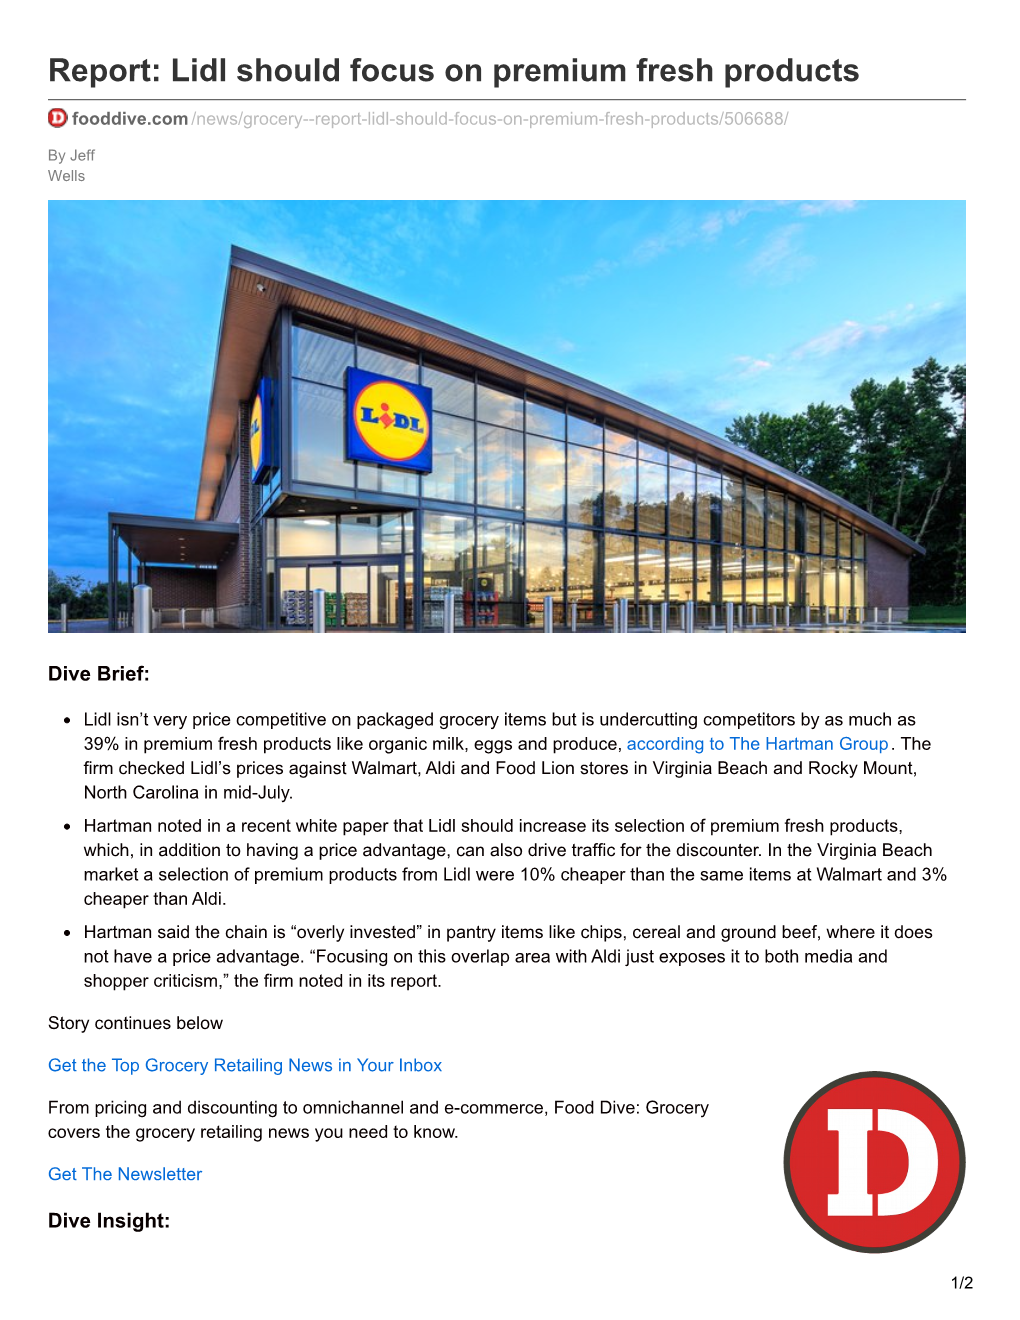 Report: Lidl Should Focus on Premium Fresh Products